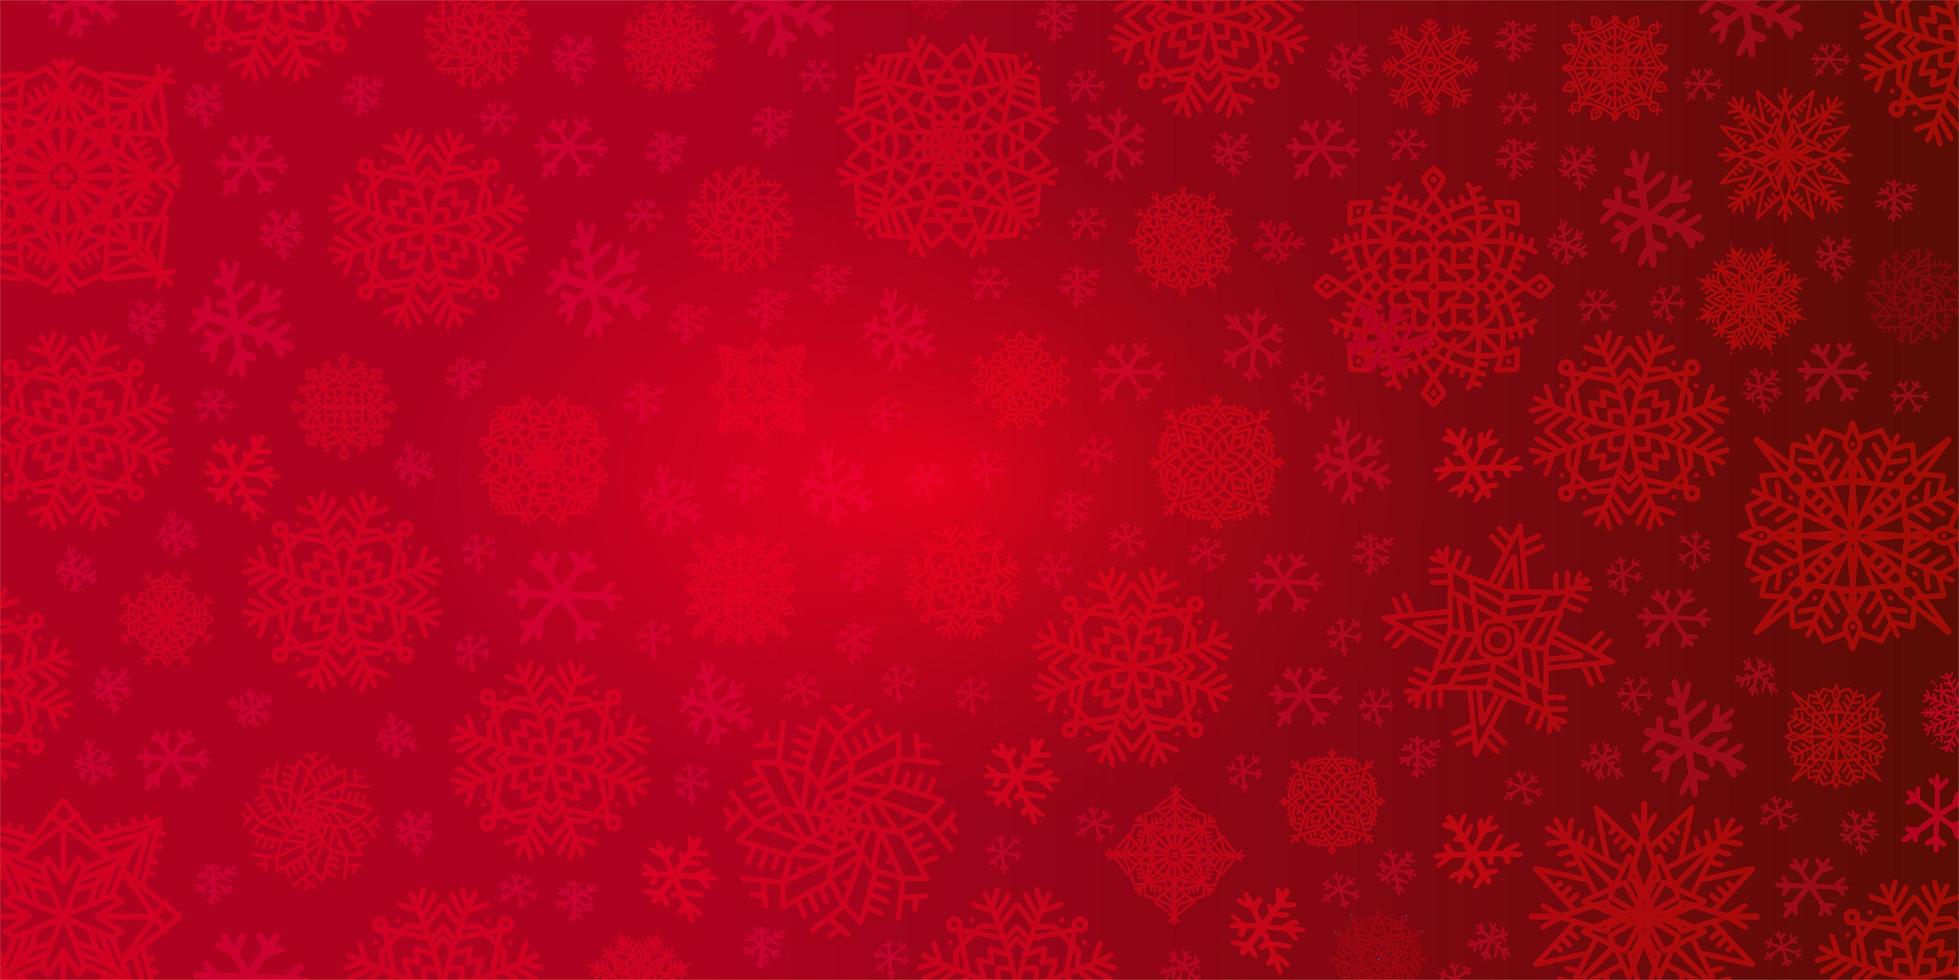 Christmas background of big and small snowflakes in red colors vector